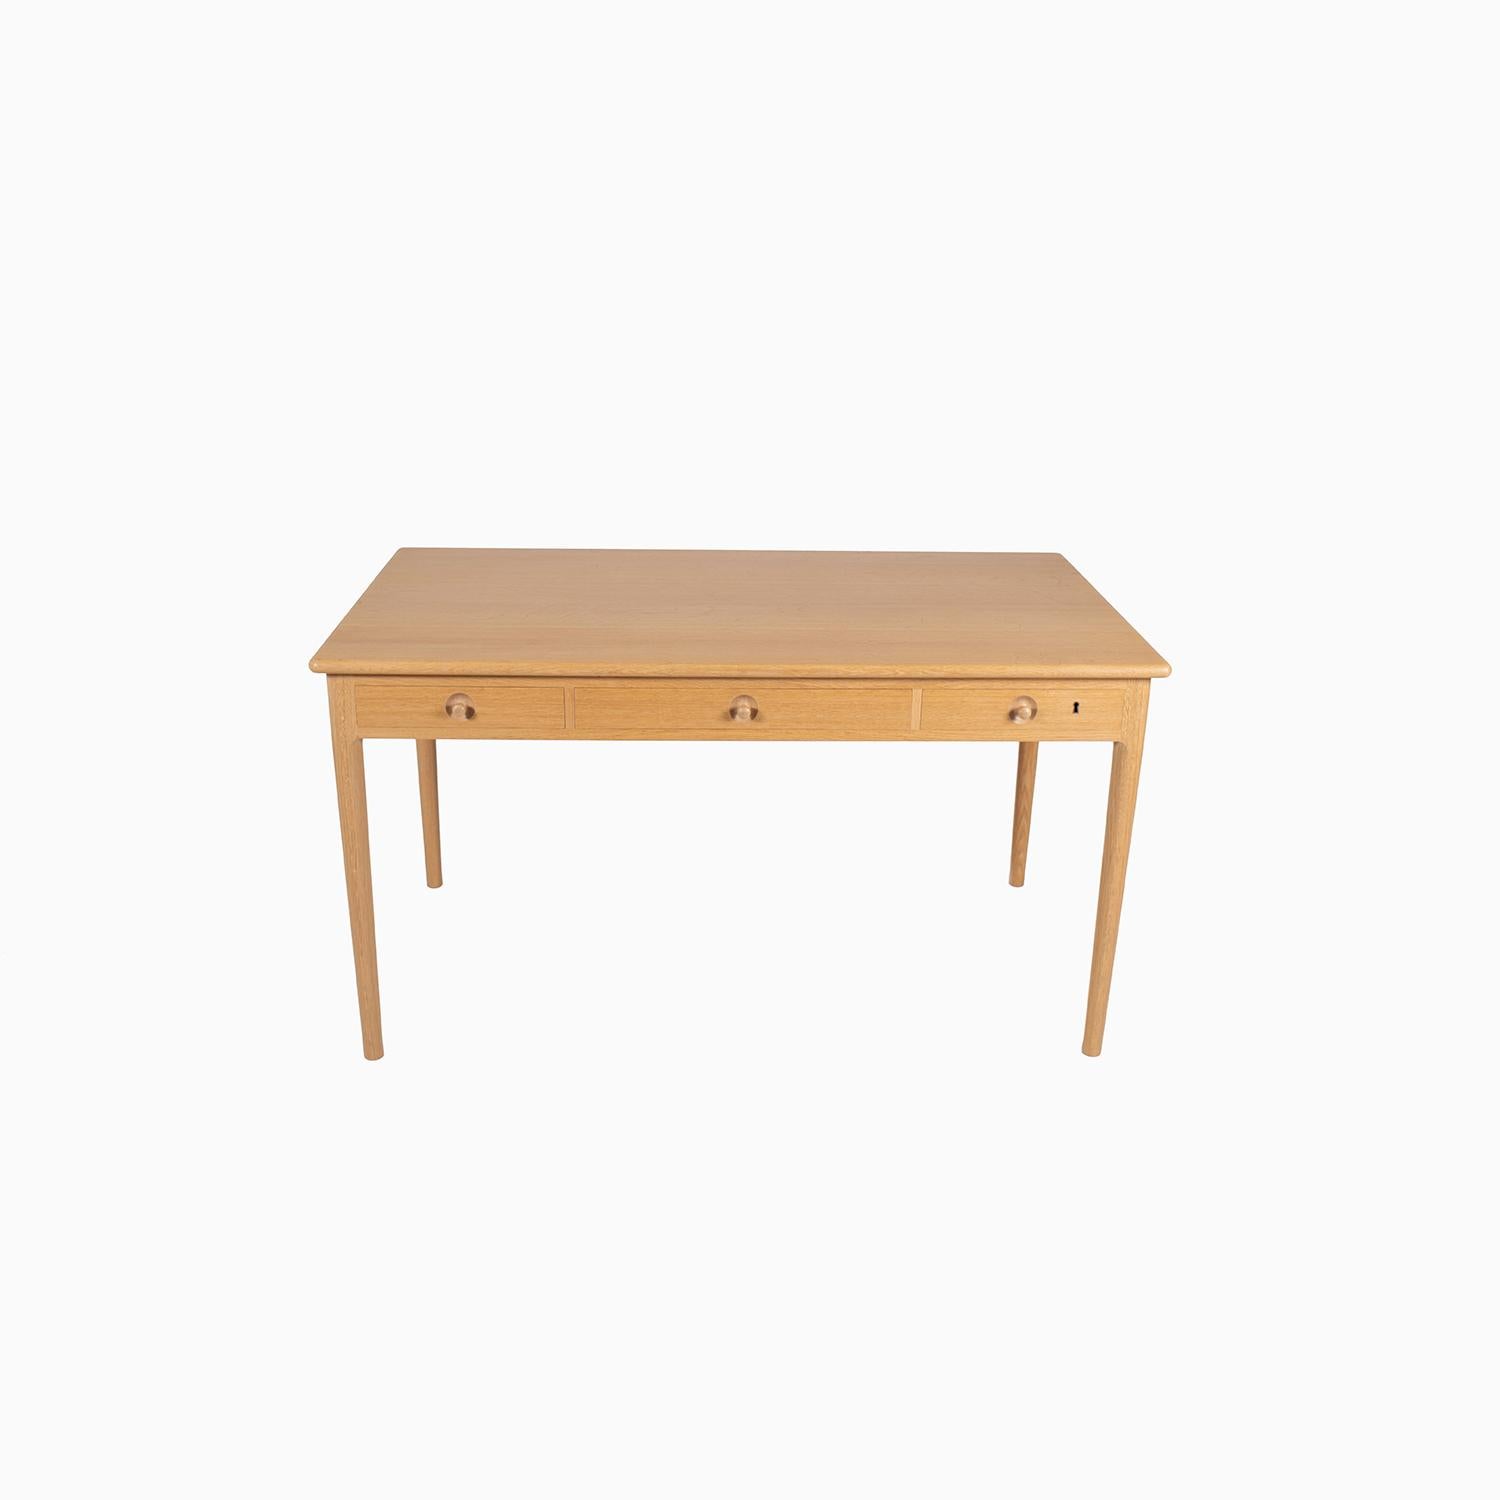 A writing desk in oak that exemplifies studio level woodworking. A design by Hans J. Wegner known as the “Classic Desk” which references traditional Scandinavian cabinetmaking. 
This example is a later model produced by PP Mobler. Three drawers with